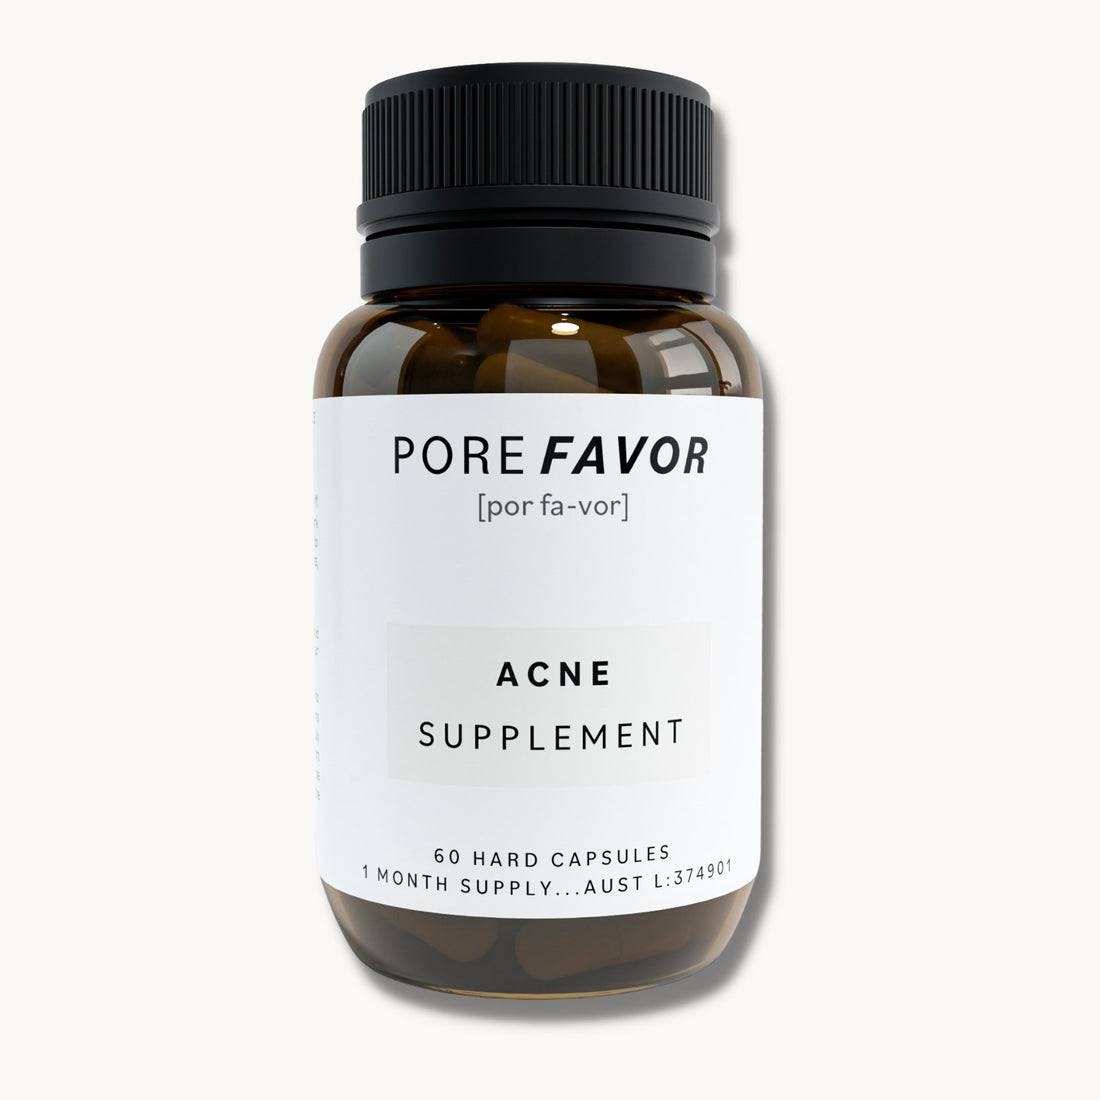 Why use natural supplements for acne? - PORE FAVOR USA